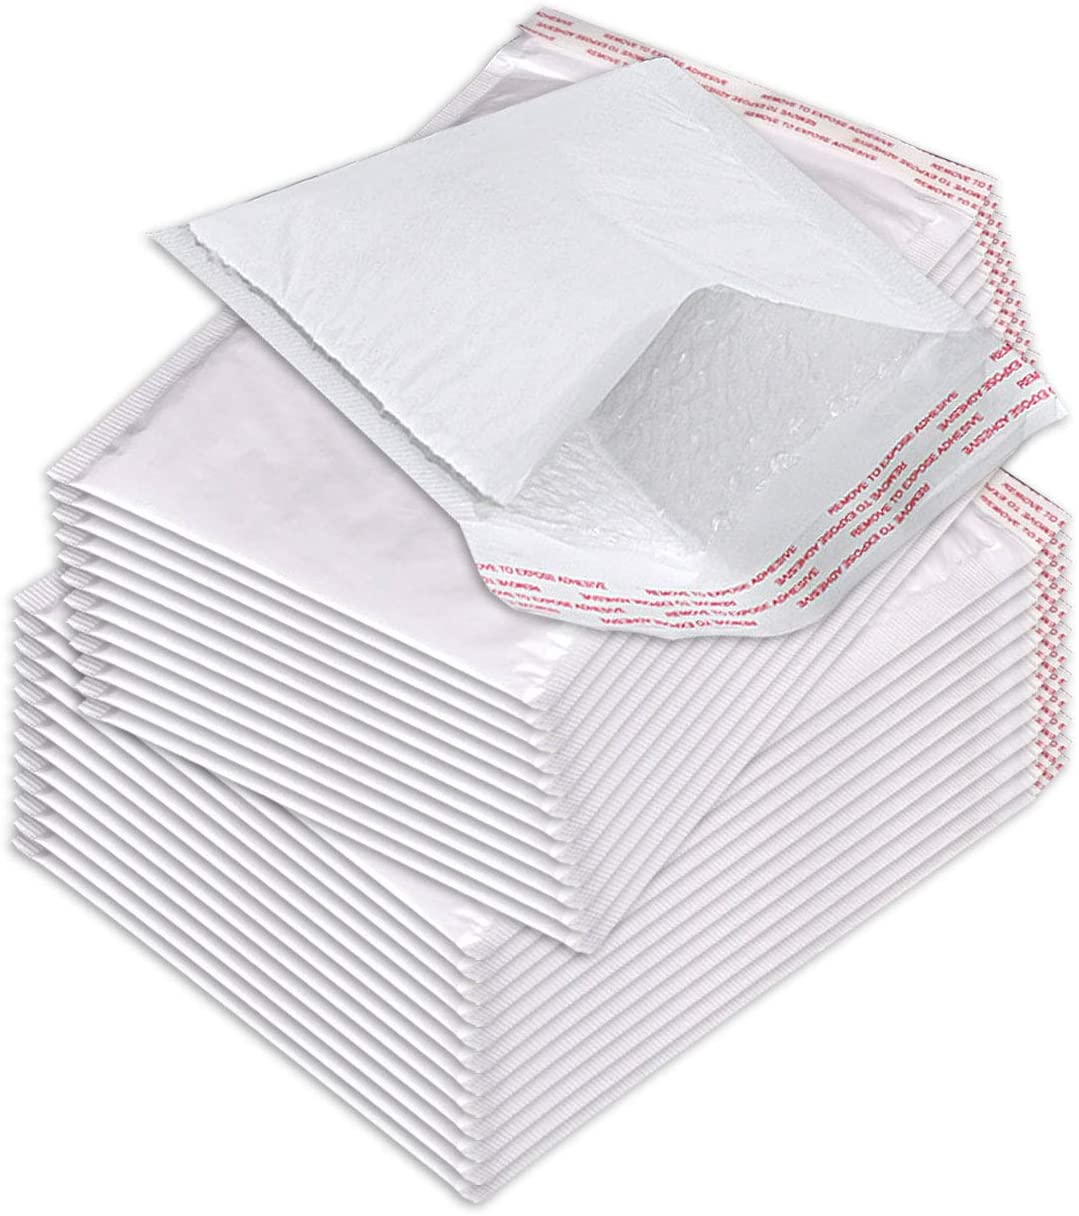 BM Paper 25 Pack 12.5" X 19" #6 Poly Bubble Mailers Envelopes Padded Shipping Bags